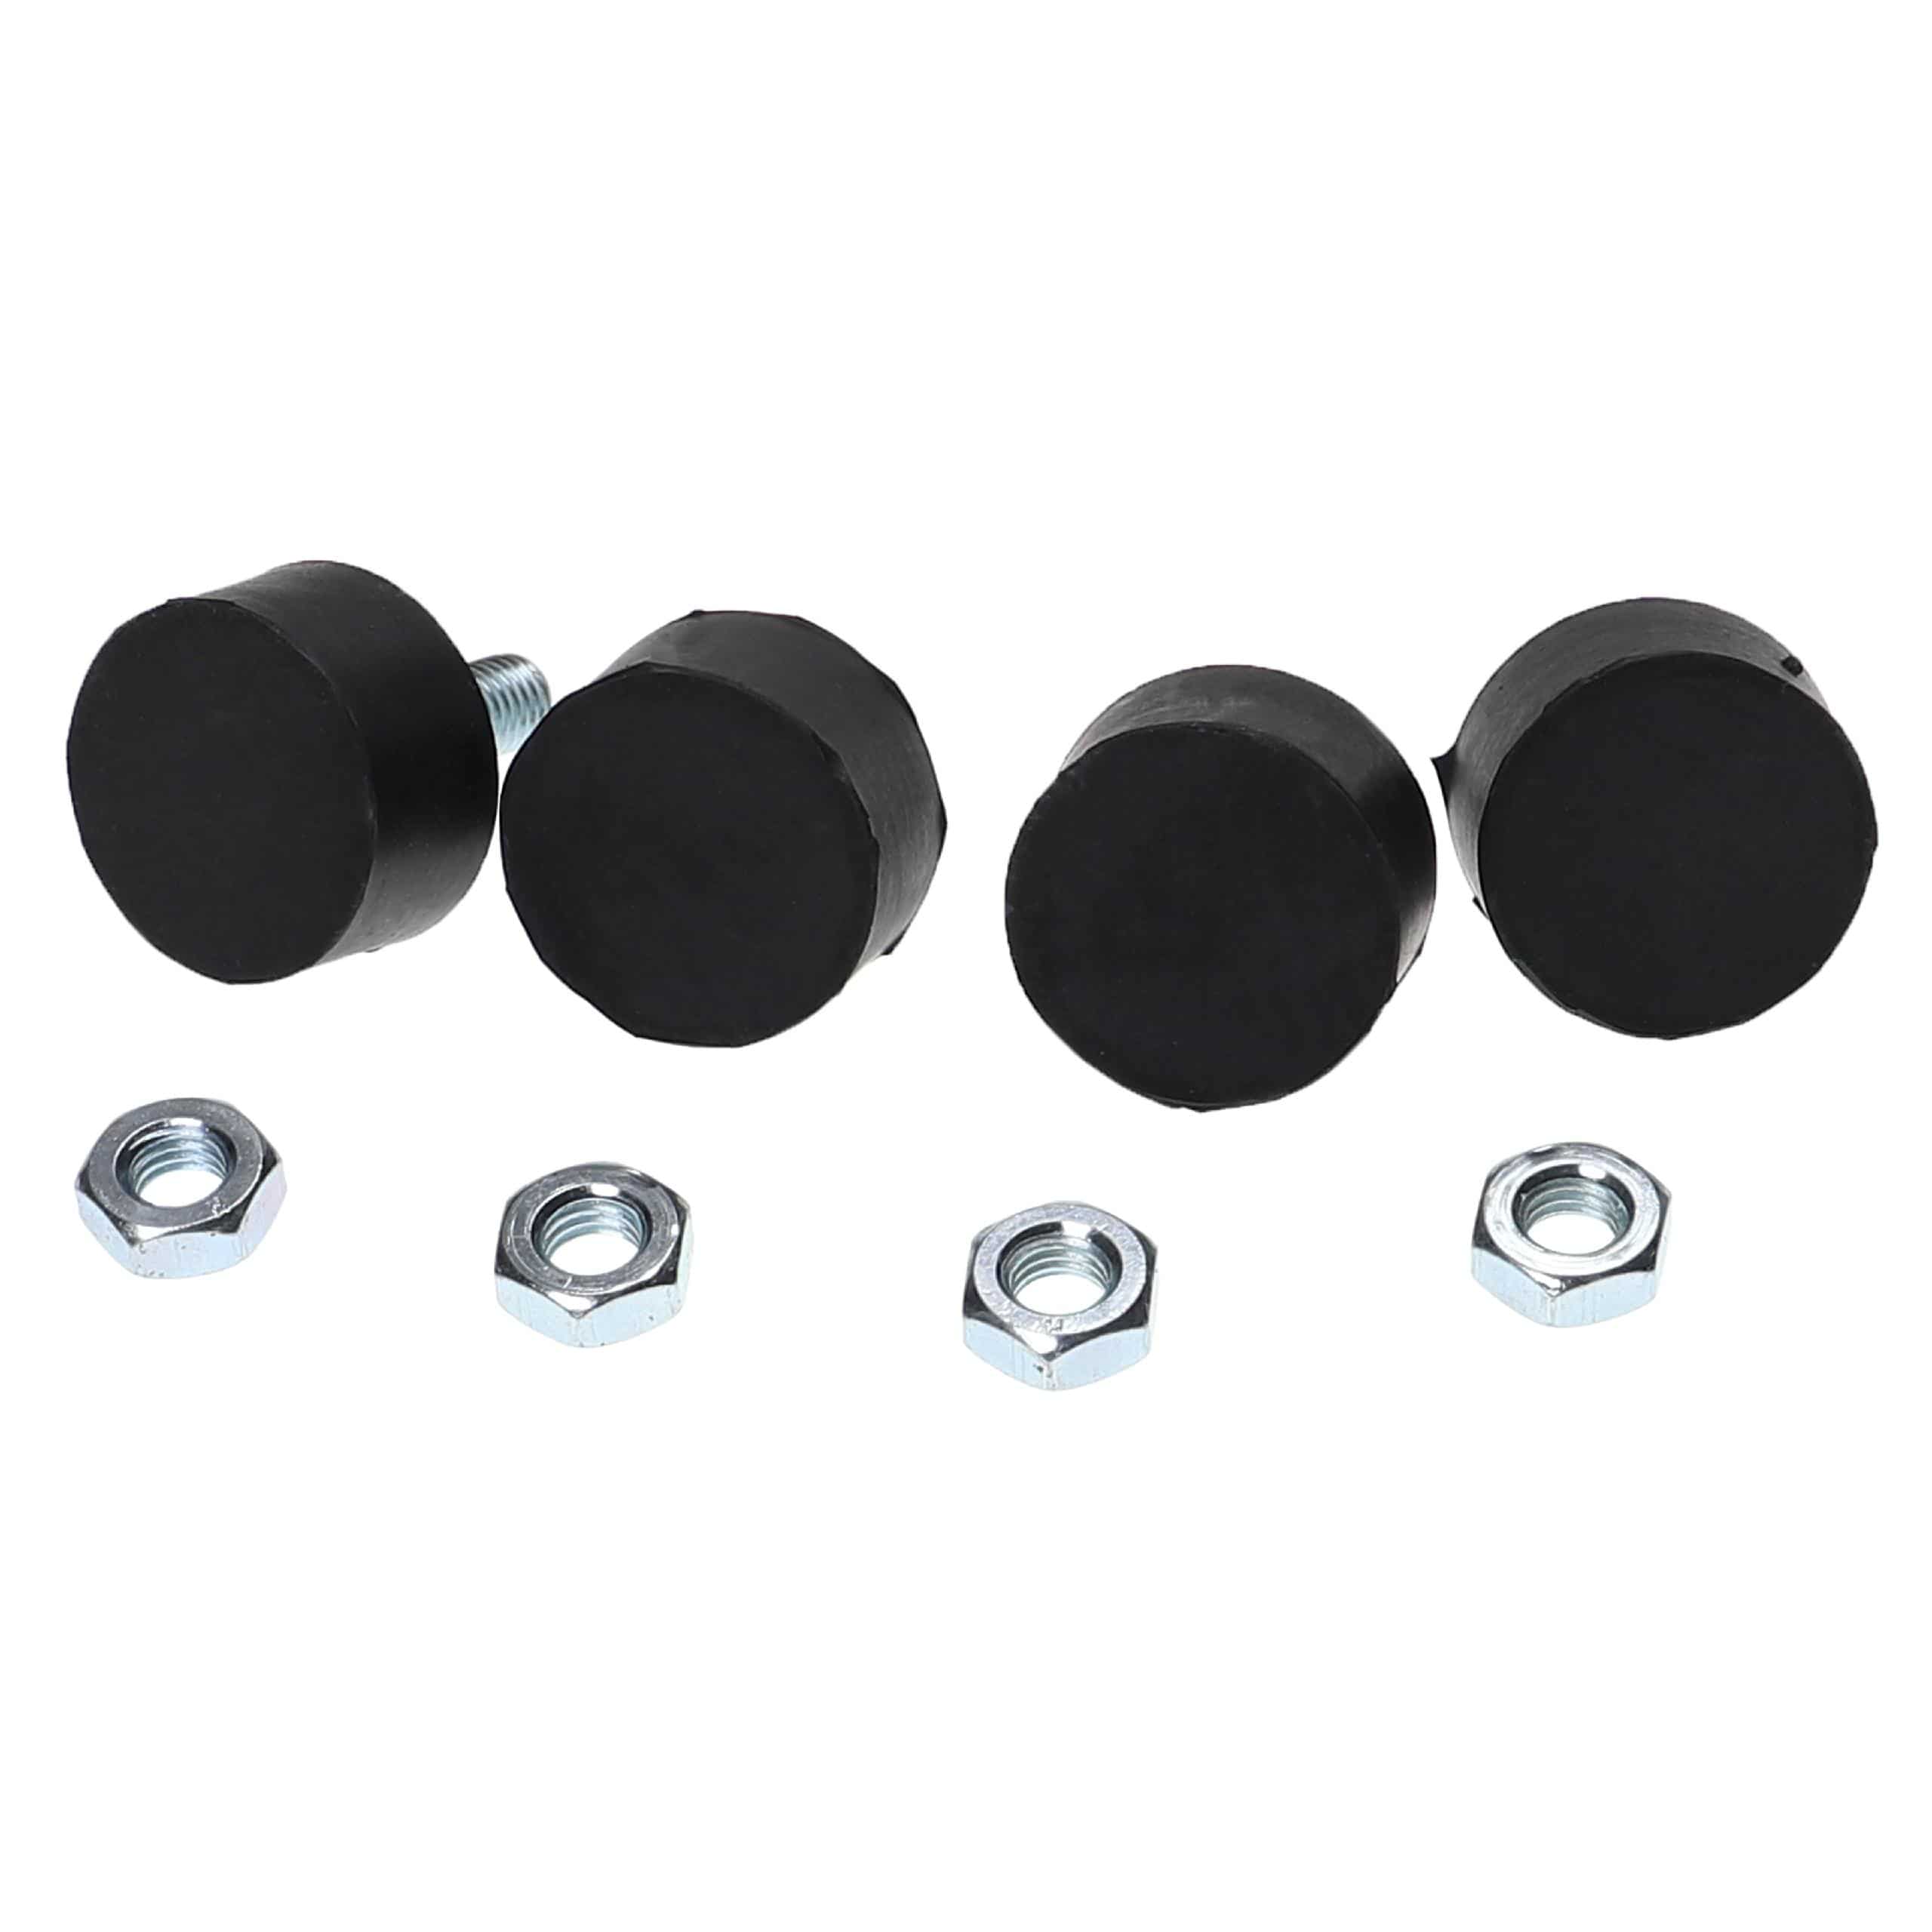 4x Vibration Dampers - Rubber Buffers M8